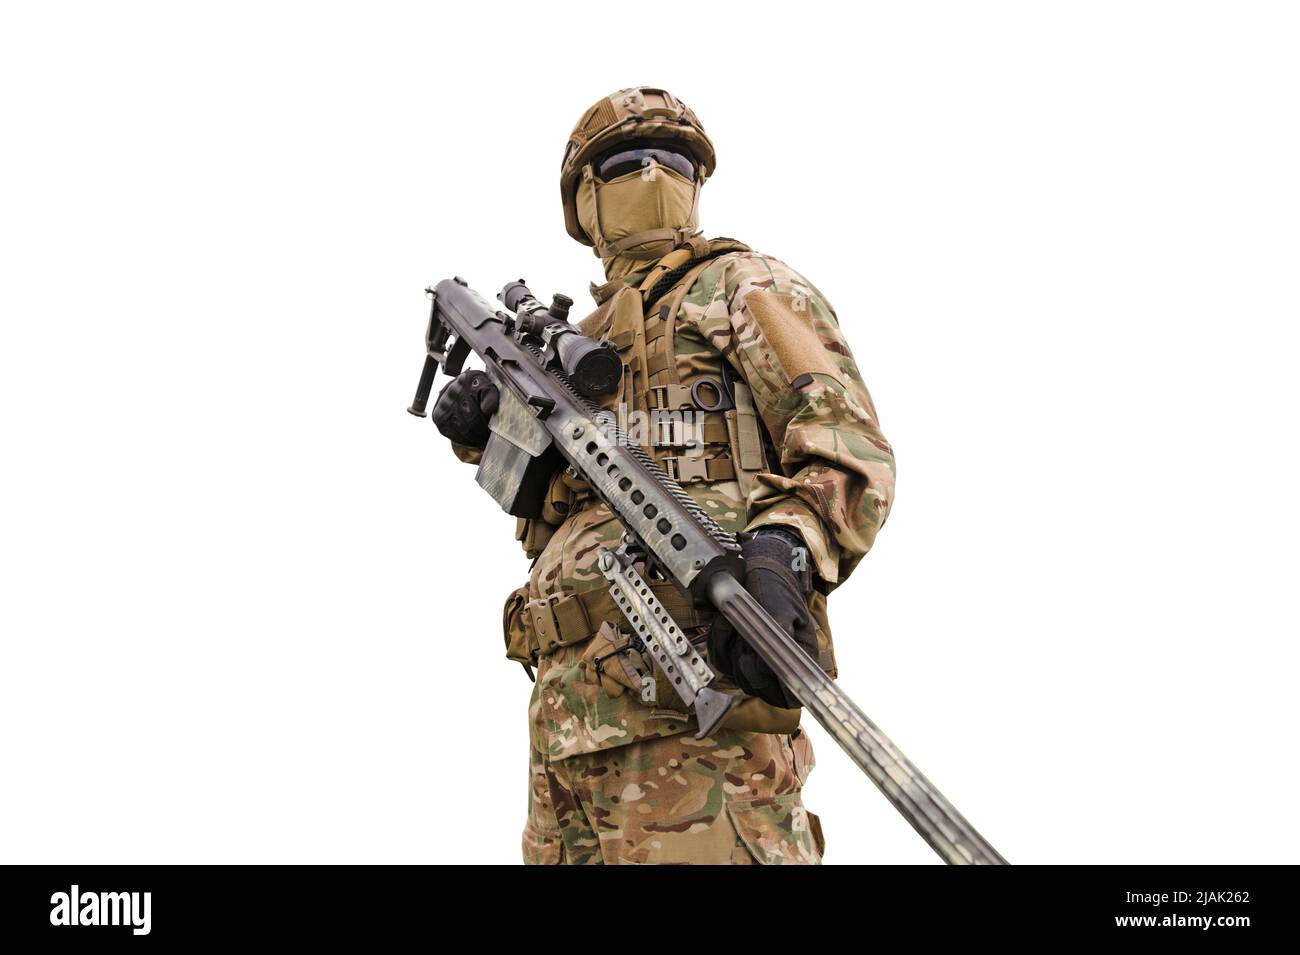 Armored special forces sniper with rifle, isolated on white background. Stock Photo